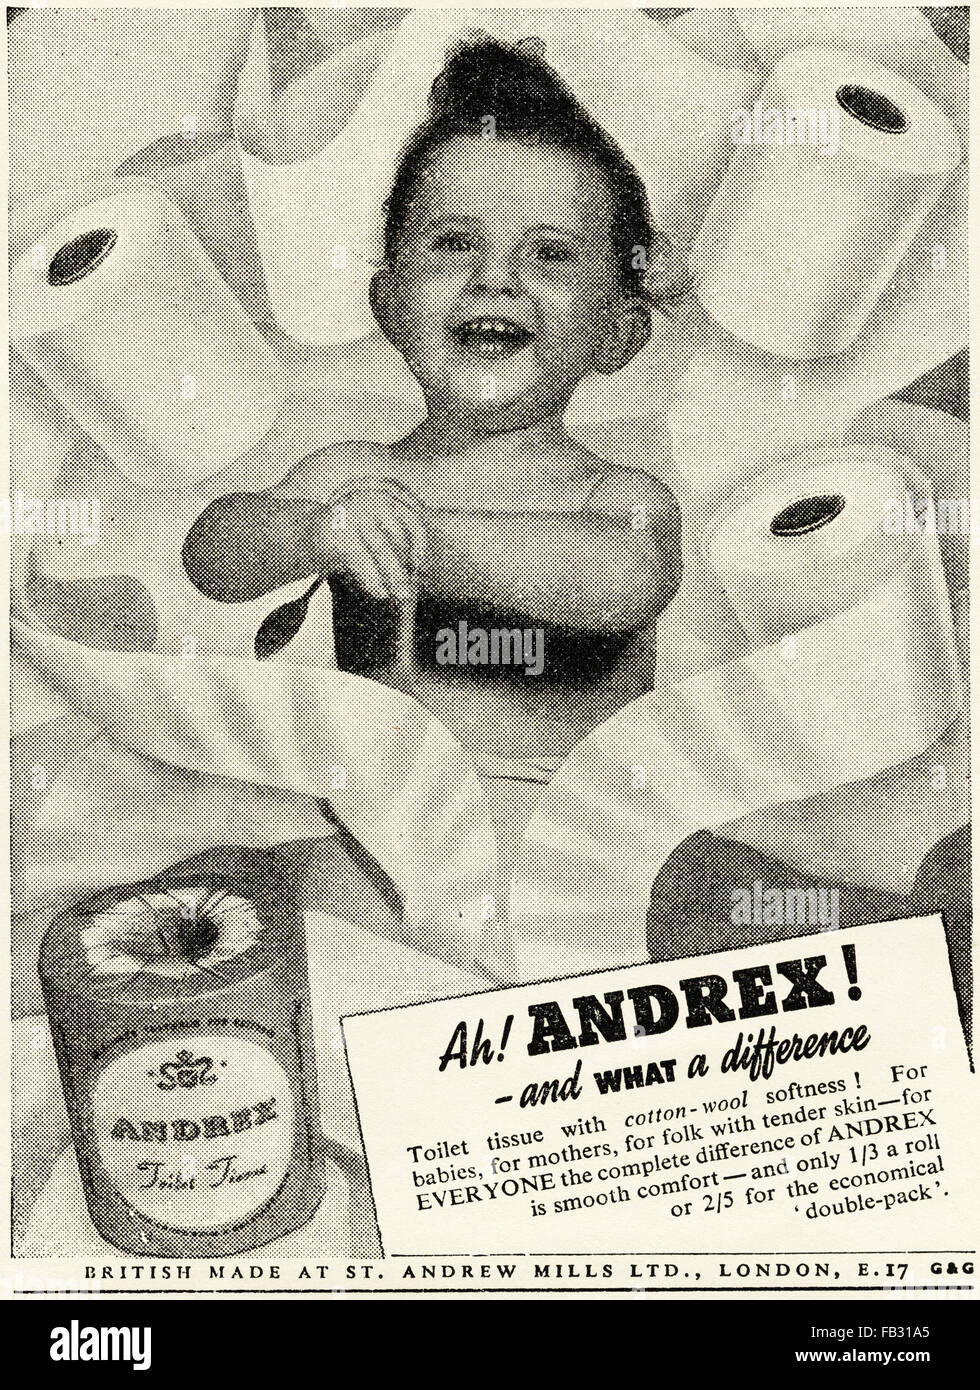 Original vintage advert from 1950s. Advertisements from 1953 advertising Andrex toilet tissue paper. 50s retro Stock Photo